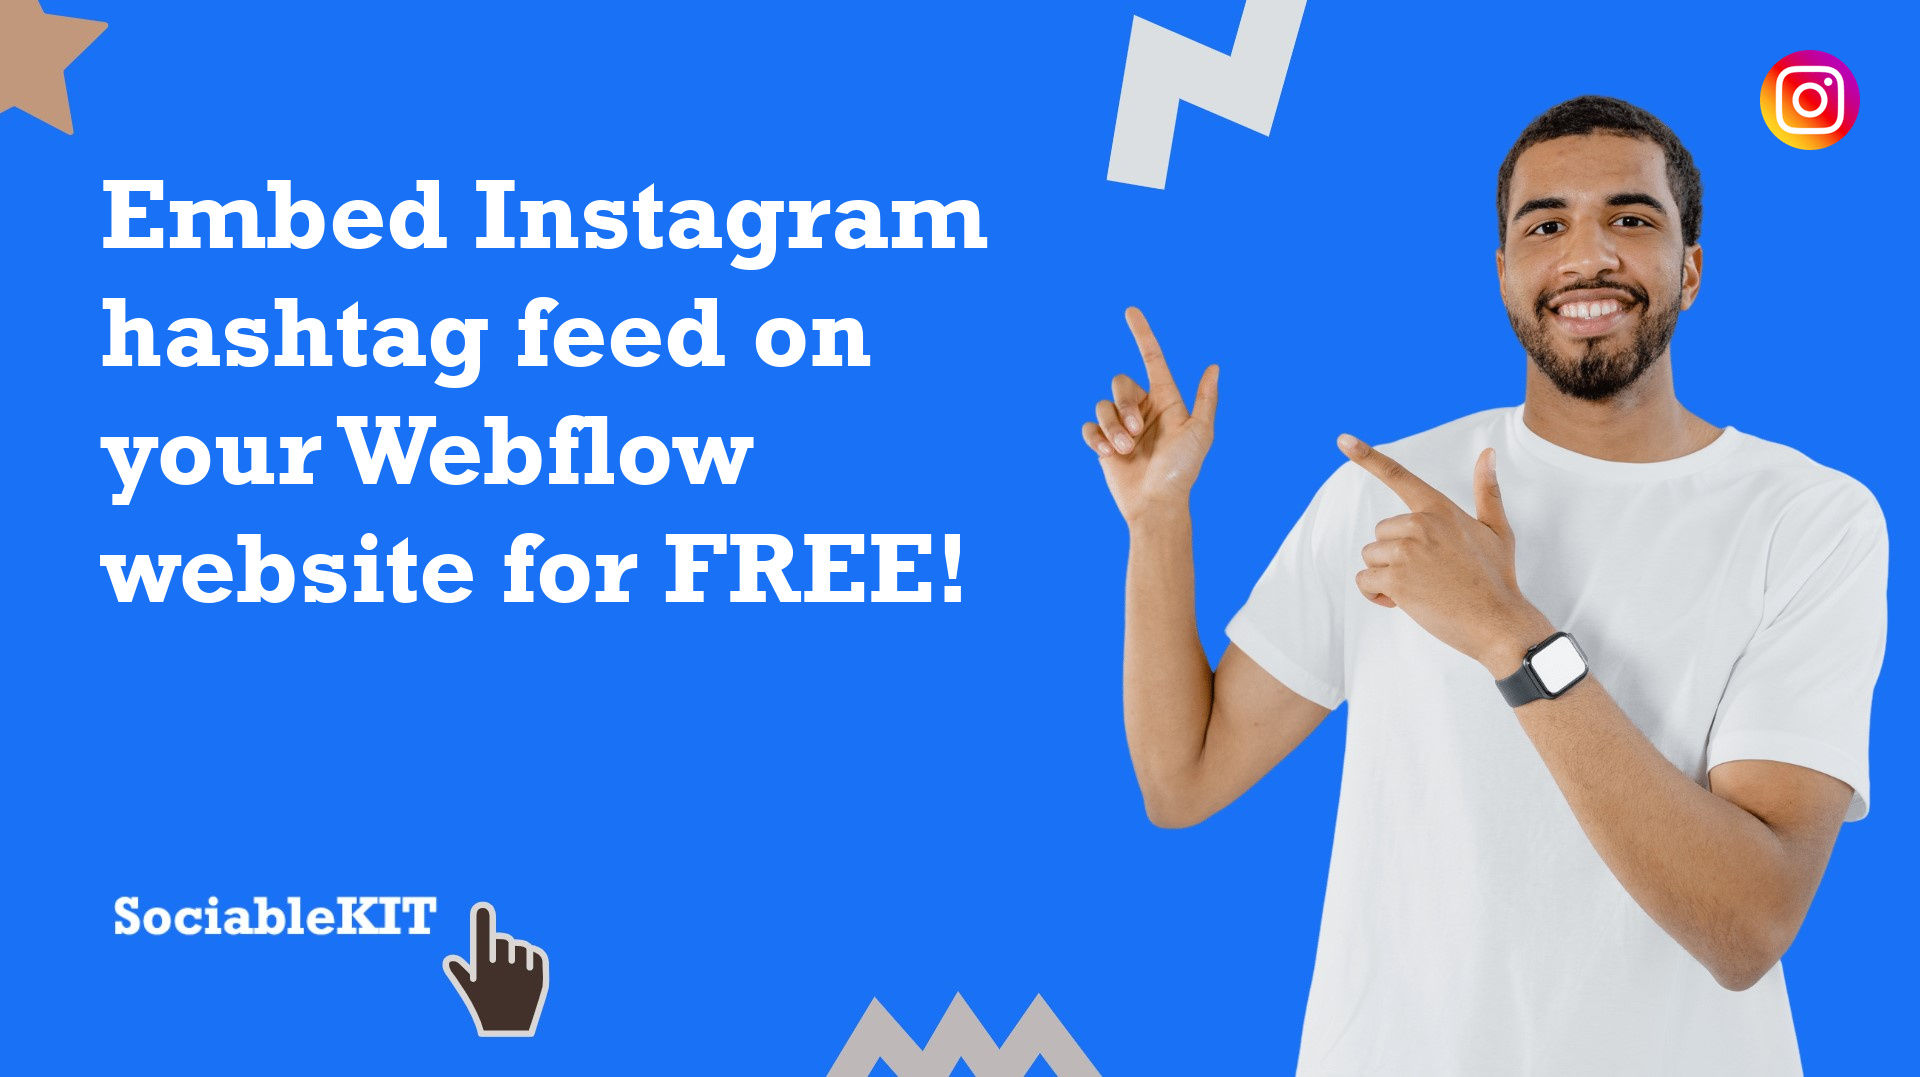 How to embed Instagram hashtag feed on your Webflow website for FREE?